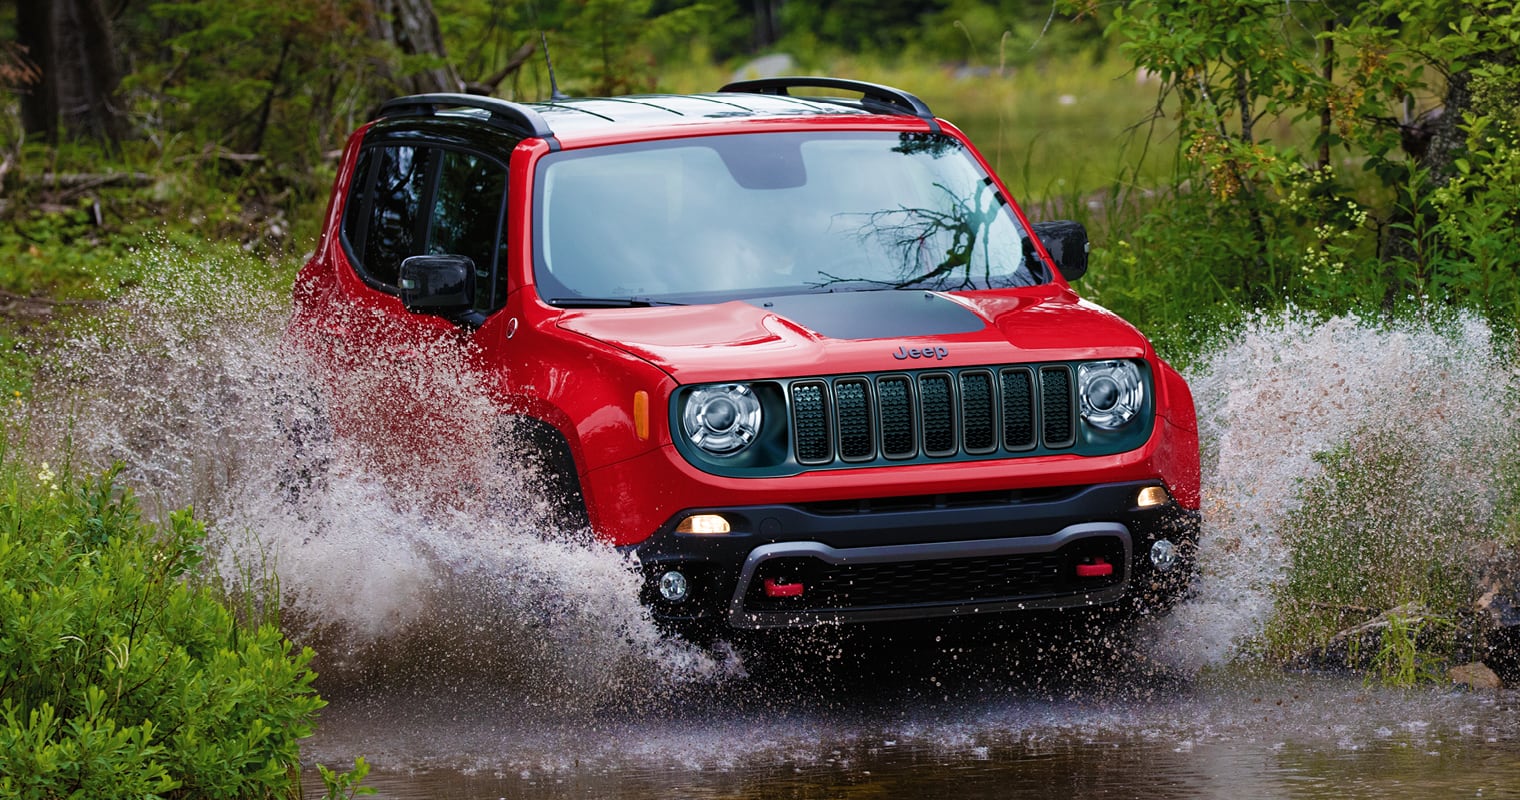 2022 Jeep Renegade Trailhawk in red offroad